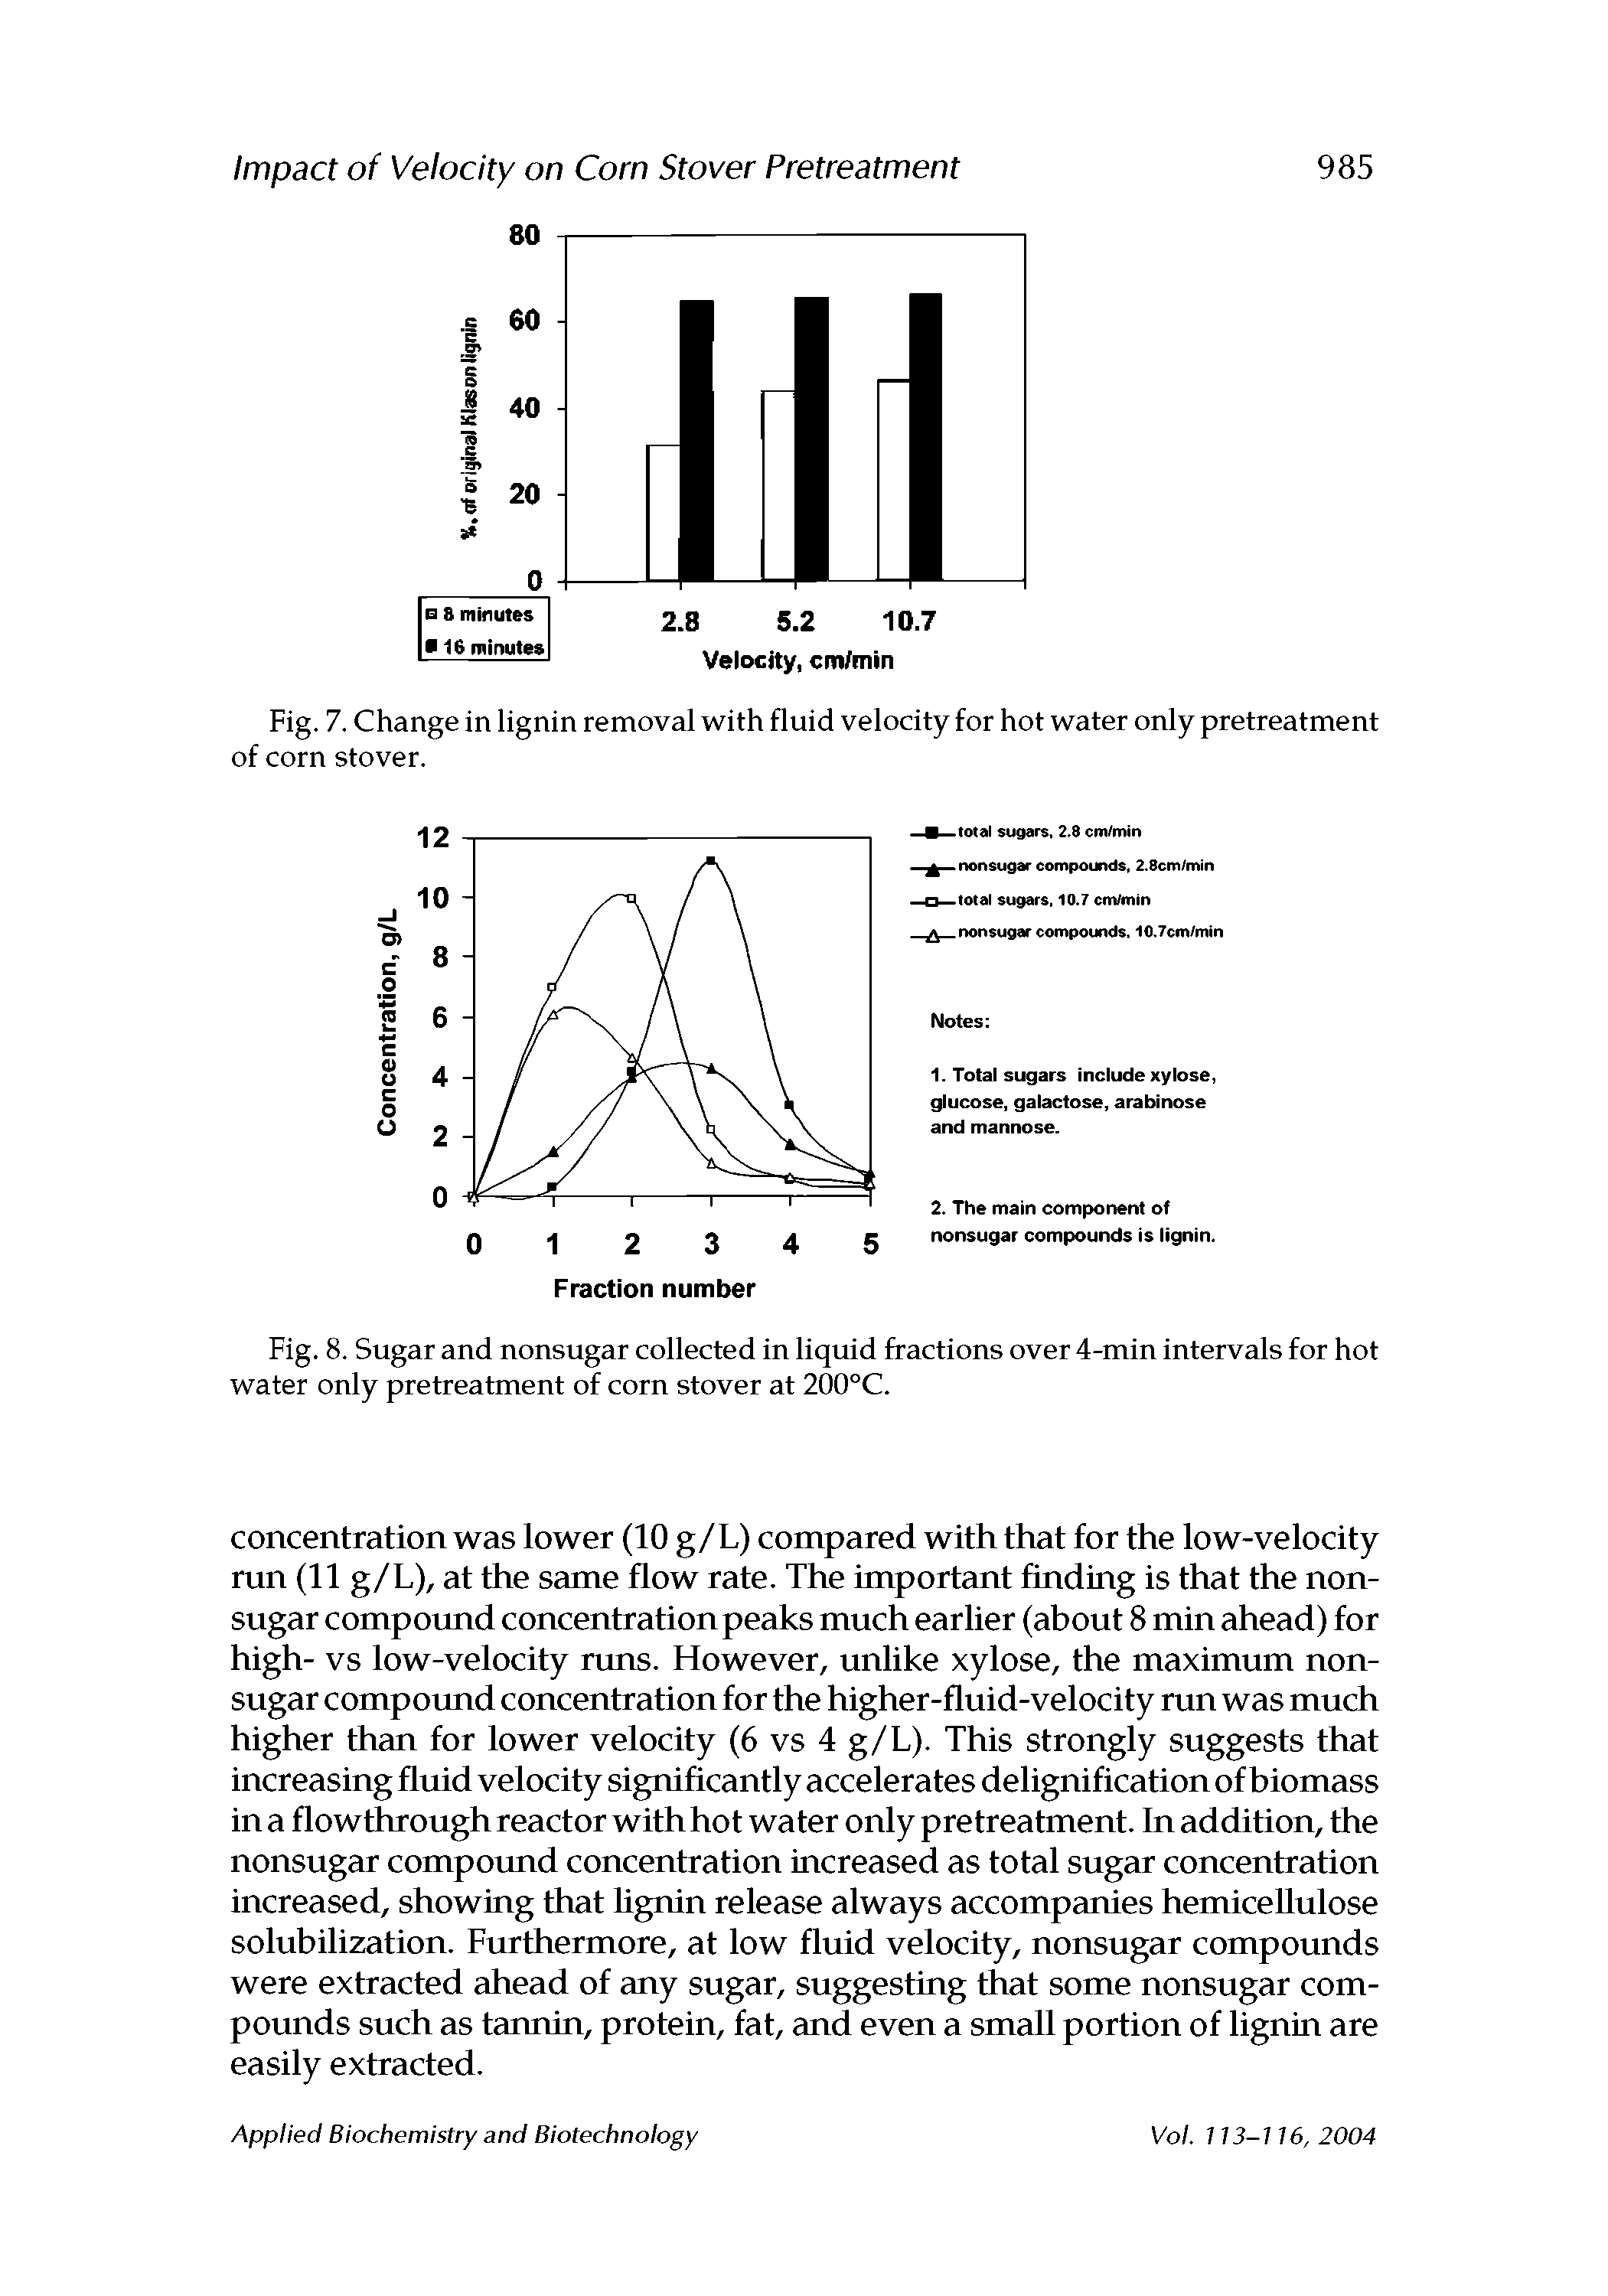 Fig. 7. Change in lignin removal with fluid velocity for hot water only pretreatment of corn stover.